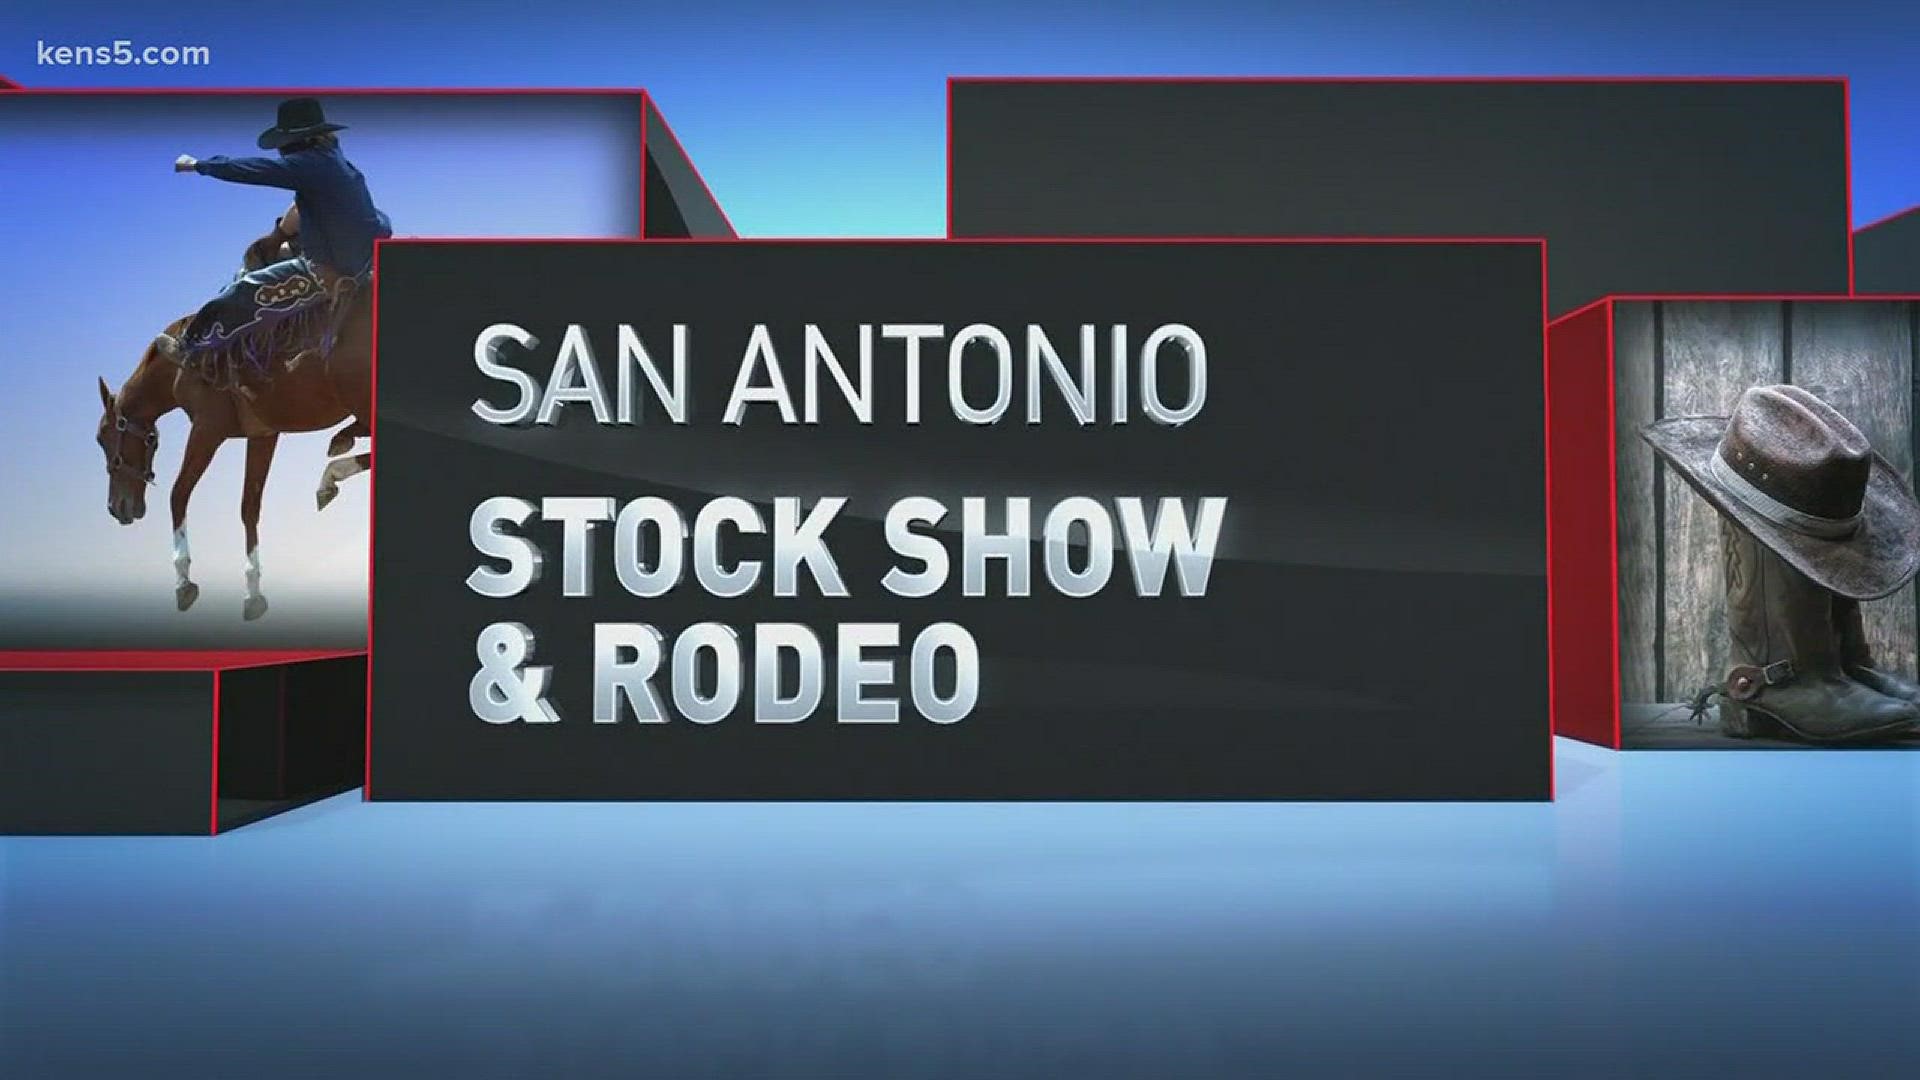 Henry Ramos shows everything you can get on Dollar Day at the rodeo and how the kids love it.